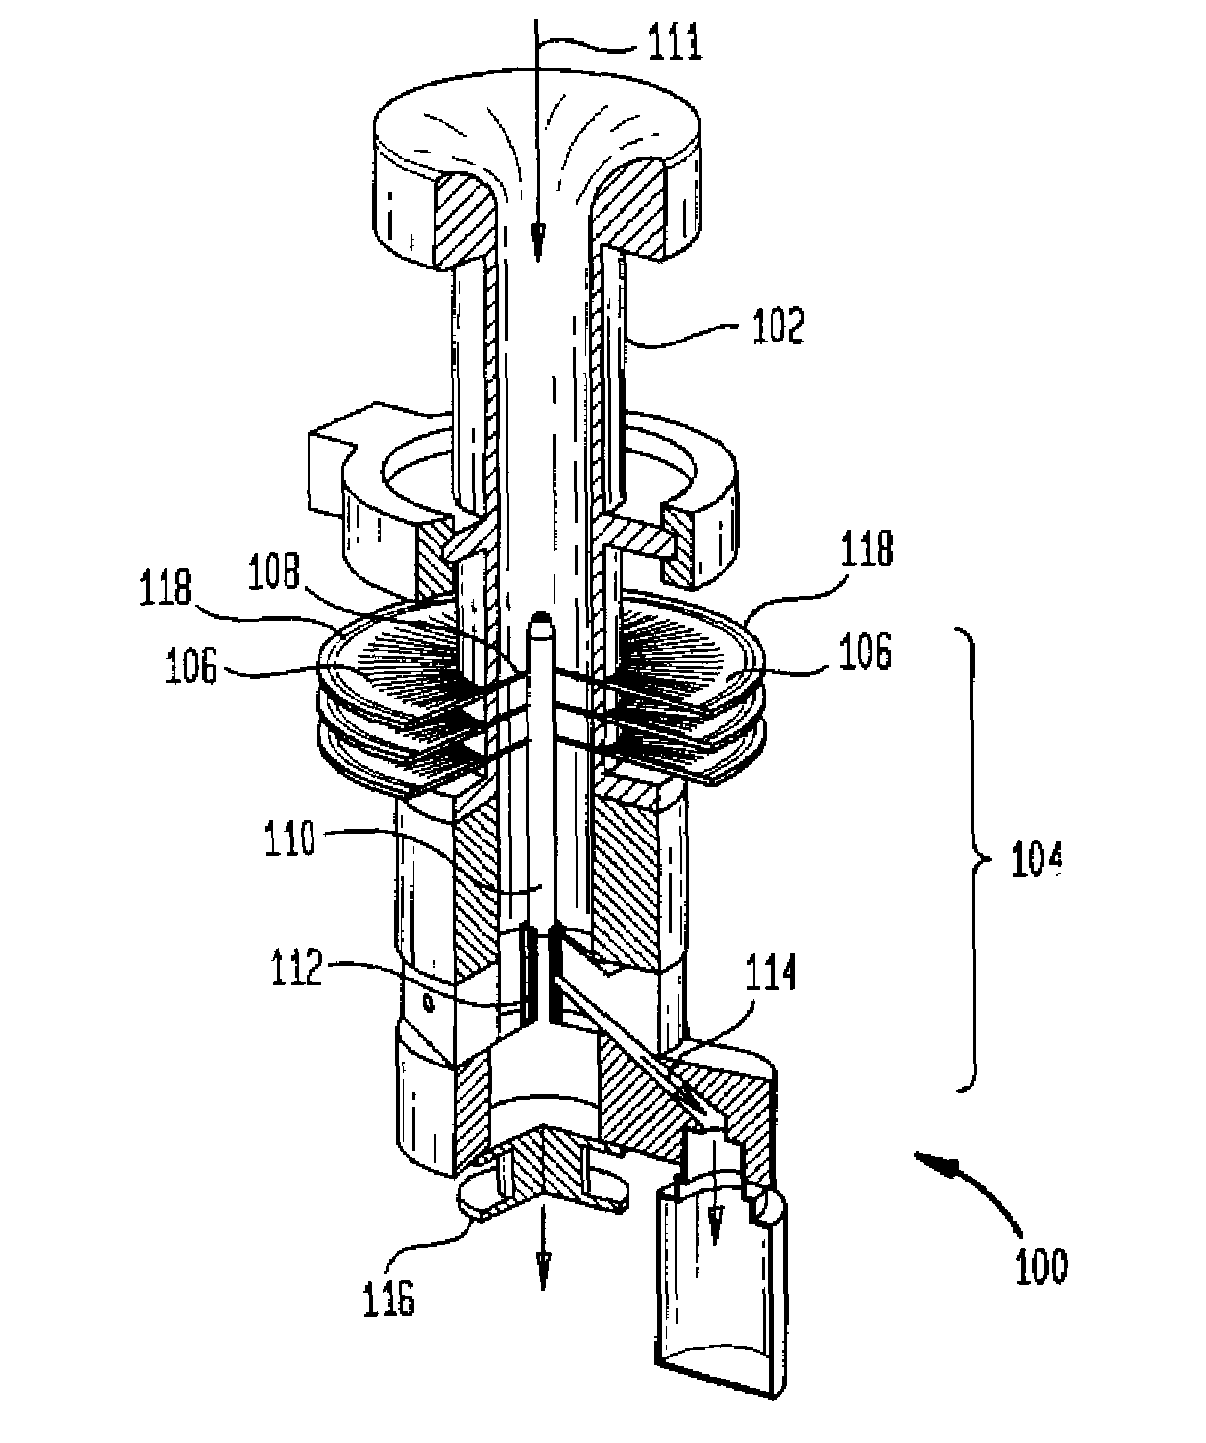 Ballast circuit for electrostatic particle collection systems